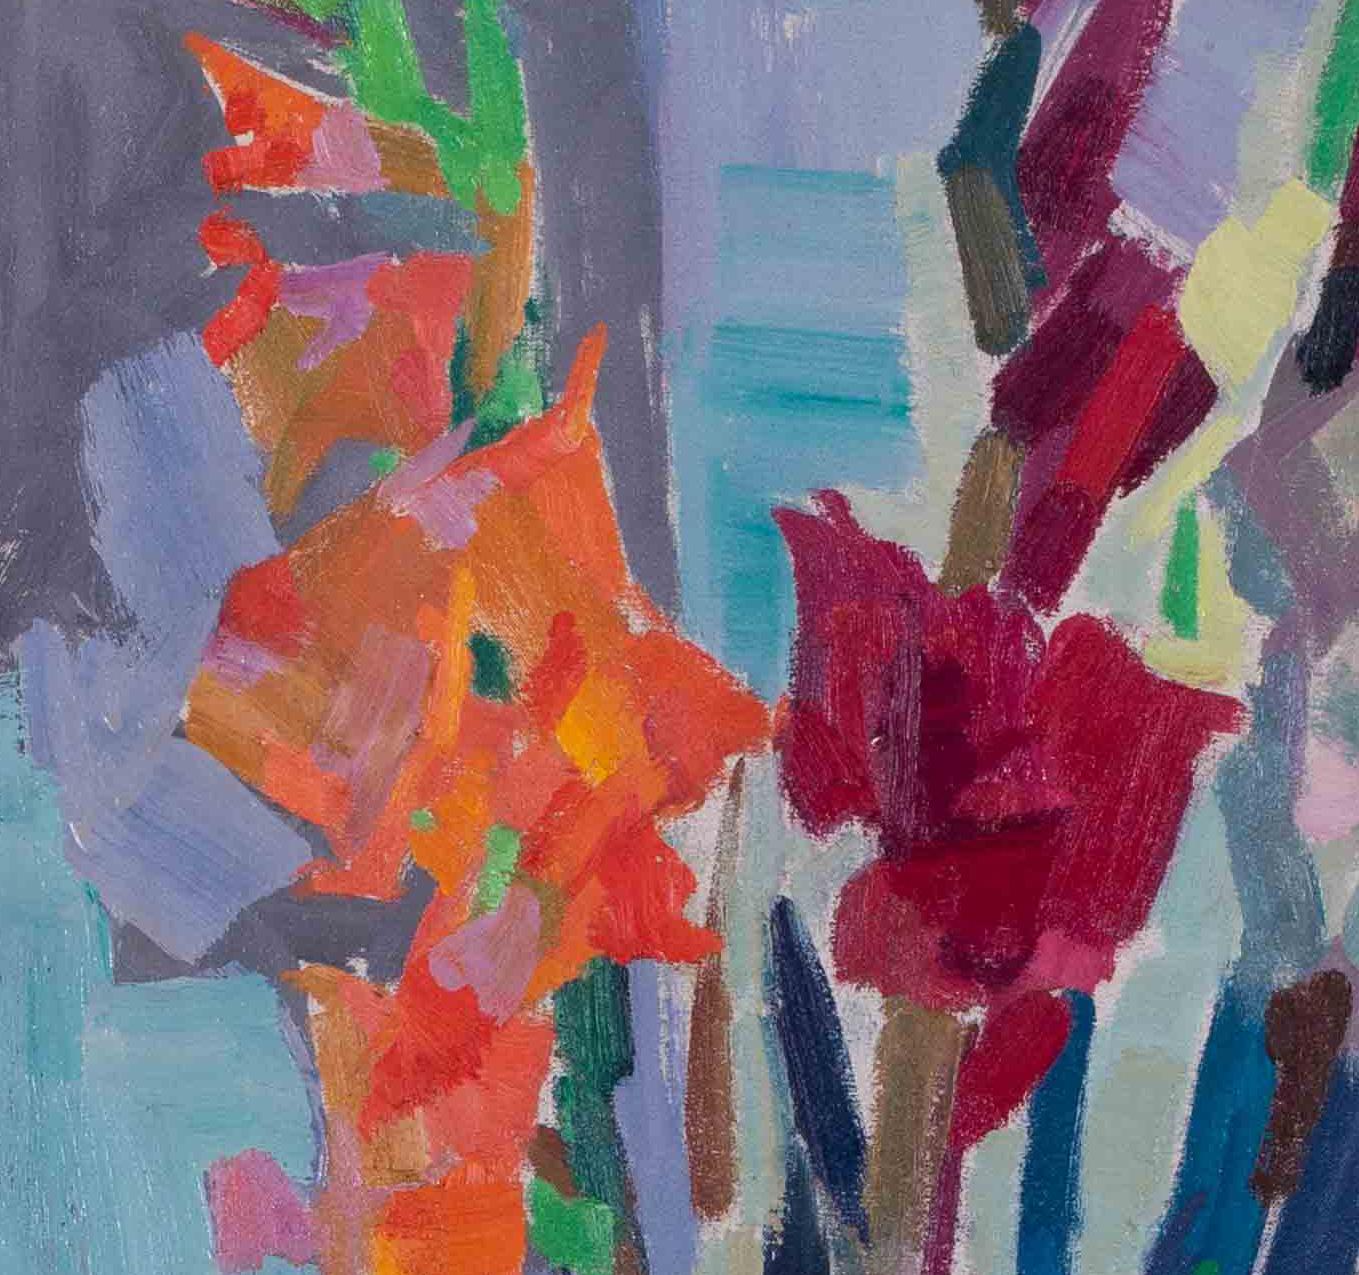 This stunning original Post-Impressionist oil painting features a vibrant vase of red and orange gladioli. The bold, broad brushstrokes contribute to the excitement of the piece, while the juxtaposition of strong red and orange tones creates a